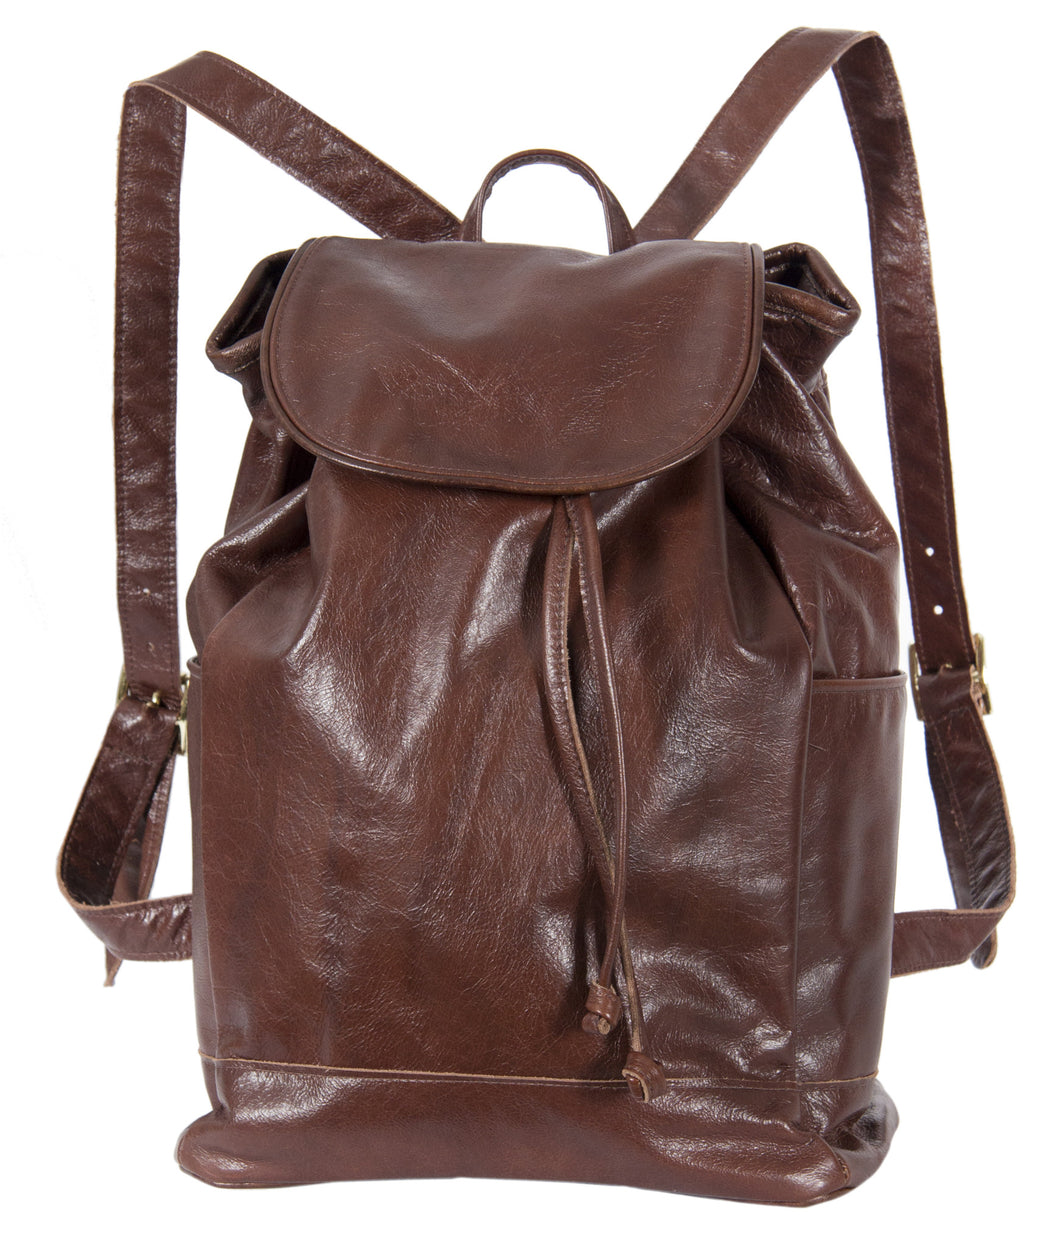 L1039-12 Backpack in an Authentic Old World Deep Chestnut Brown Leather. Part of The On the Tee Vintage Golf Collection and Cosmetic and Travel, Vintage Canadiana, and Totes Collections 10